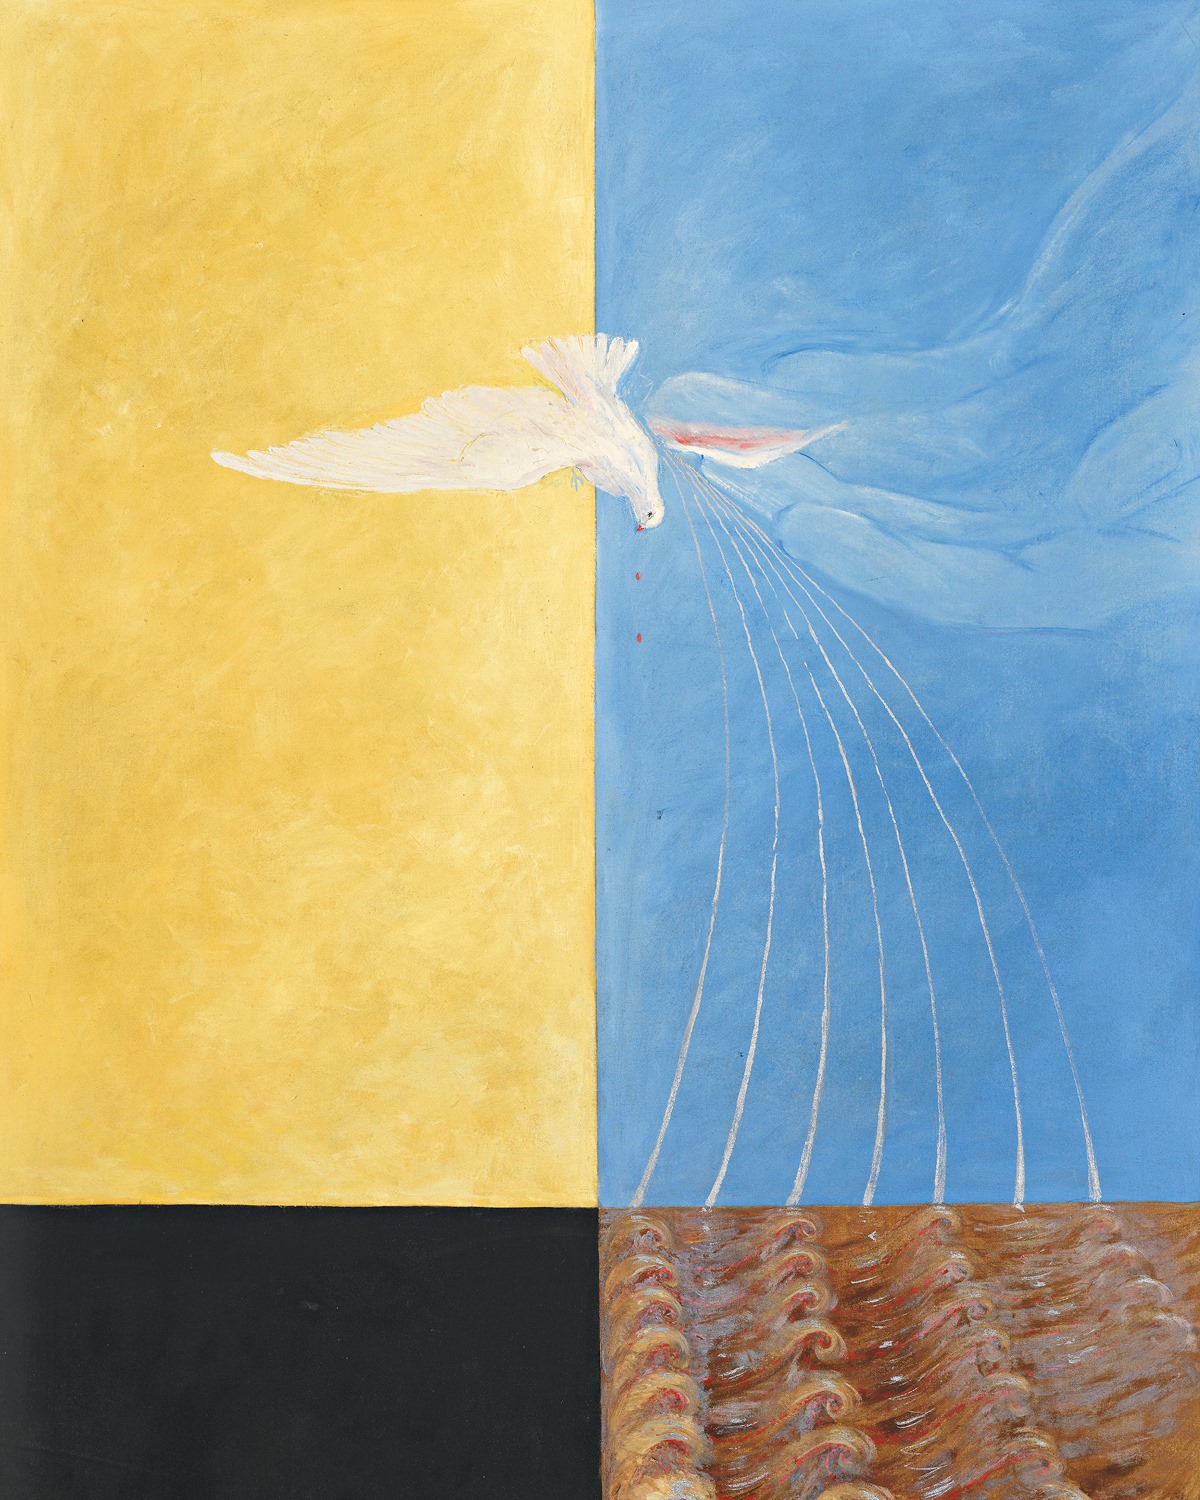 The Dove No. 4 by Hilma af Klint - 1915 - 152 x 115.5 cm private collection